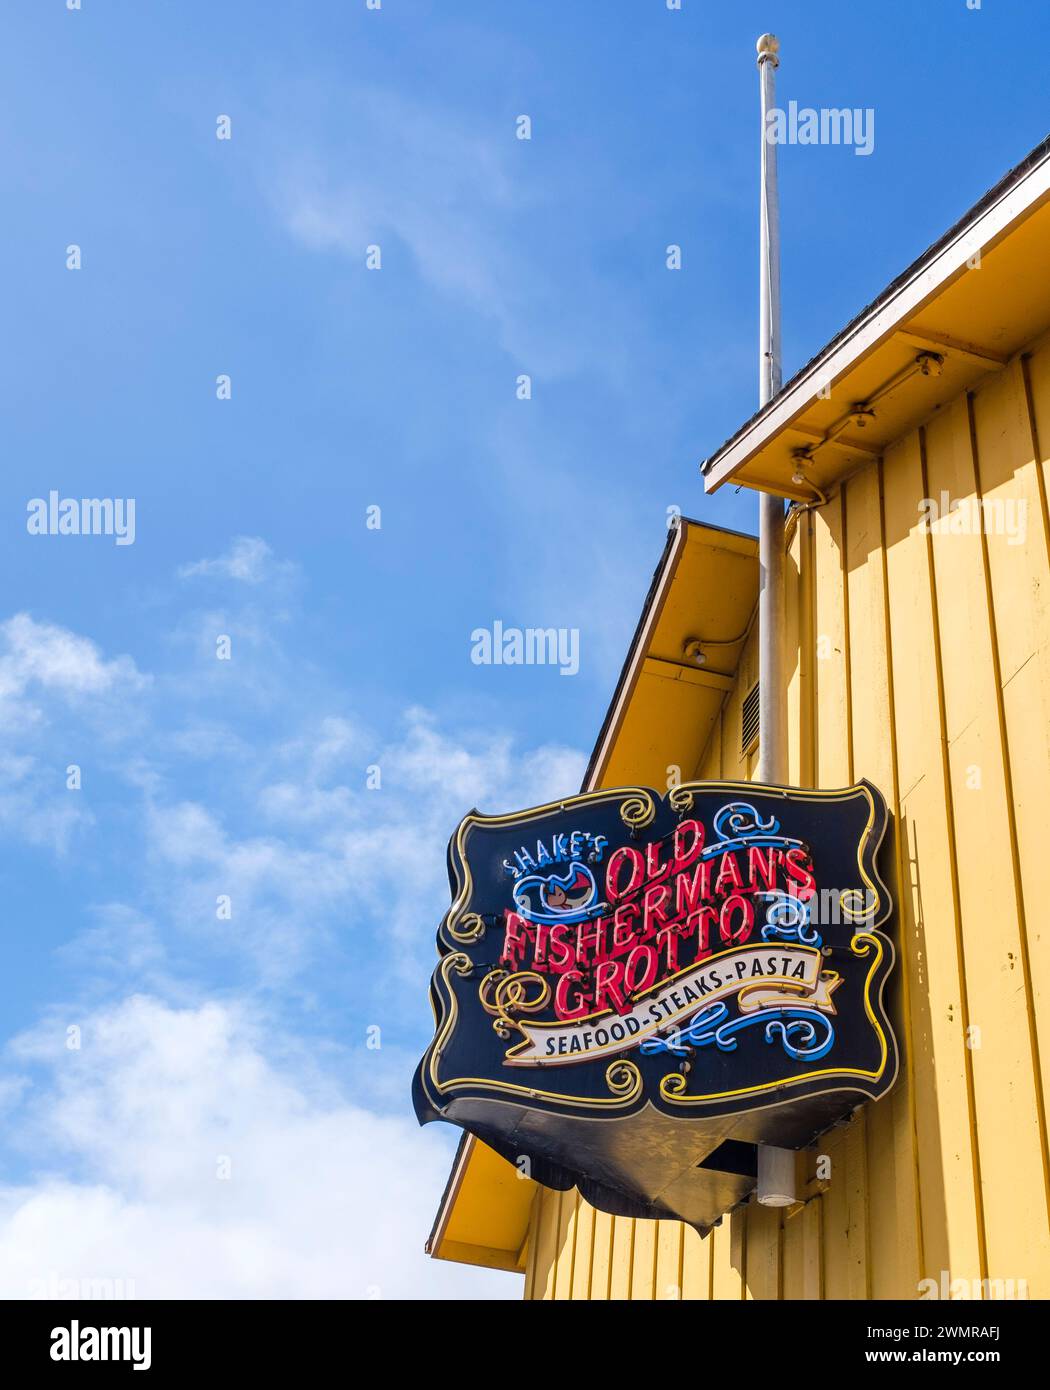 Neon sign and yellow building off the famous Old Fisherman's Grotto seafood restaurant at the landmark fisherman's wharf in Monterey, California Stock Photo